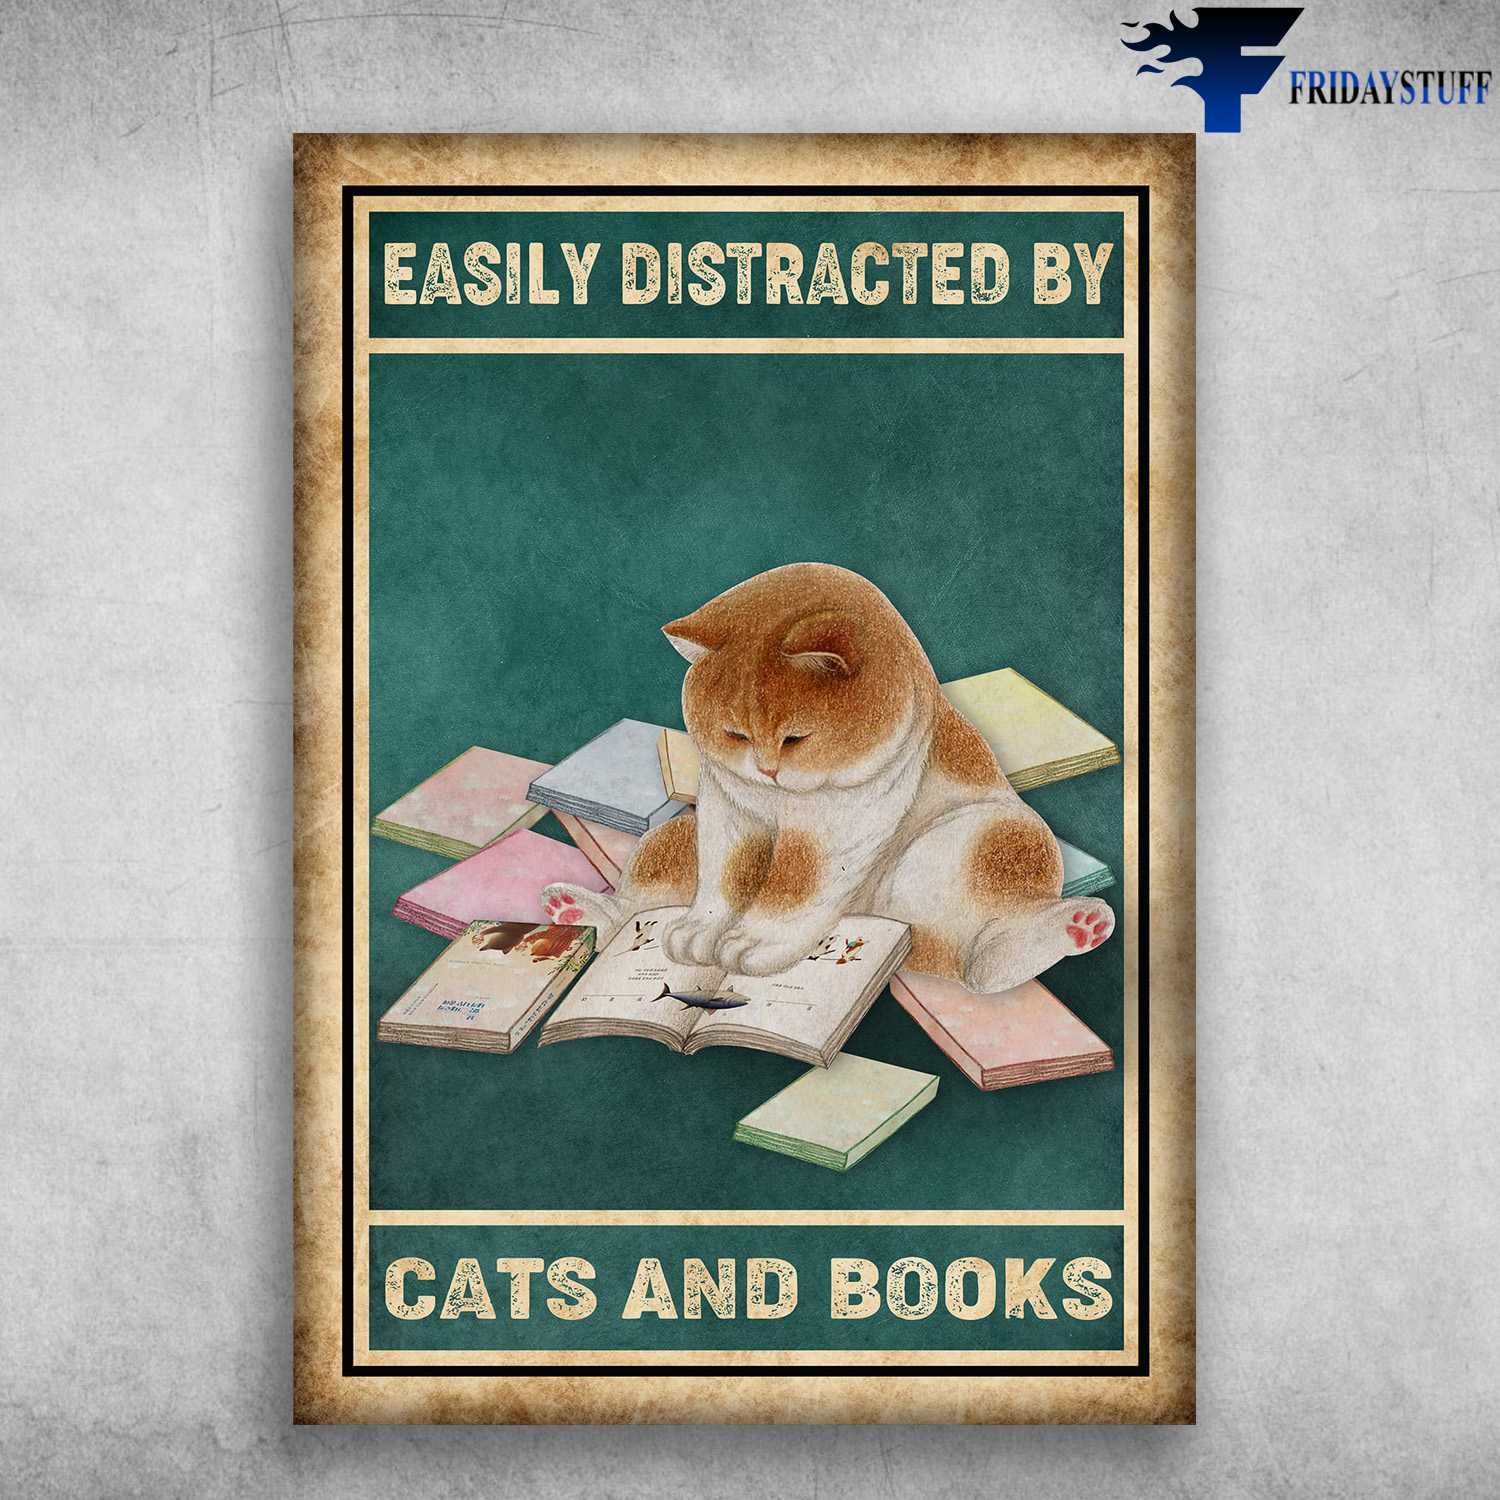 Cute Cat Reads Book - Easily Distracted By, Cat And Books